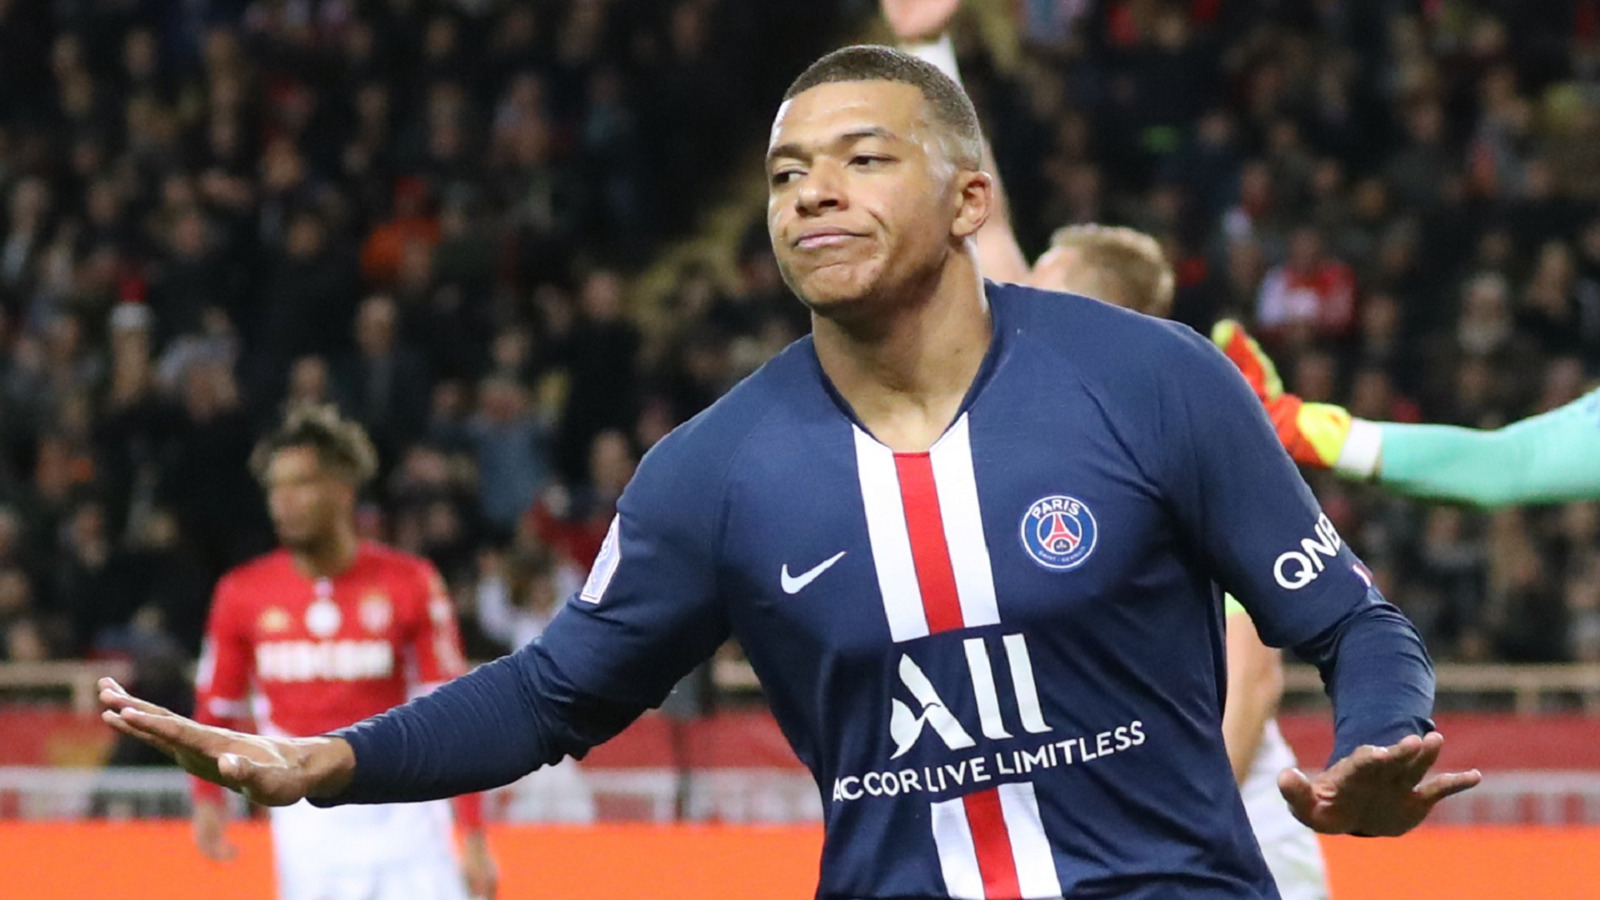 Sagnol Believes in Mbappe’s Potential to Shine after Moving to Liverpool